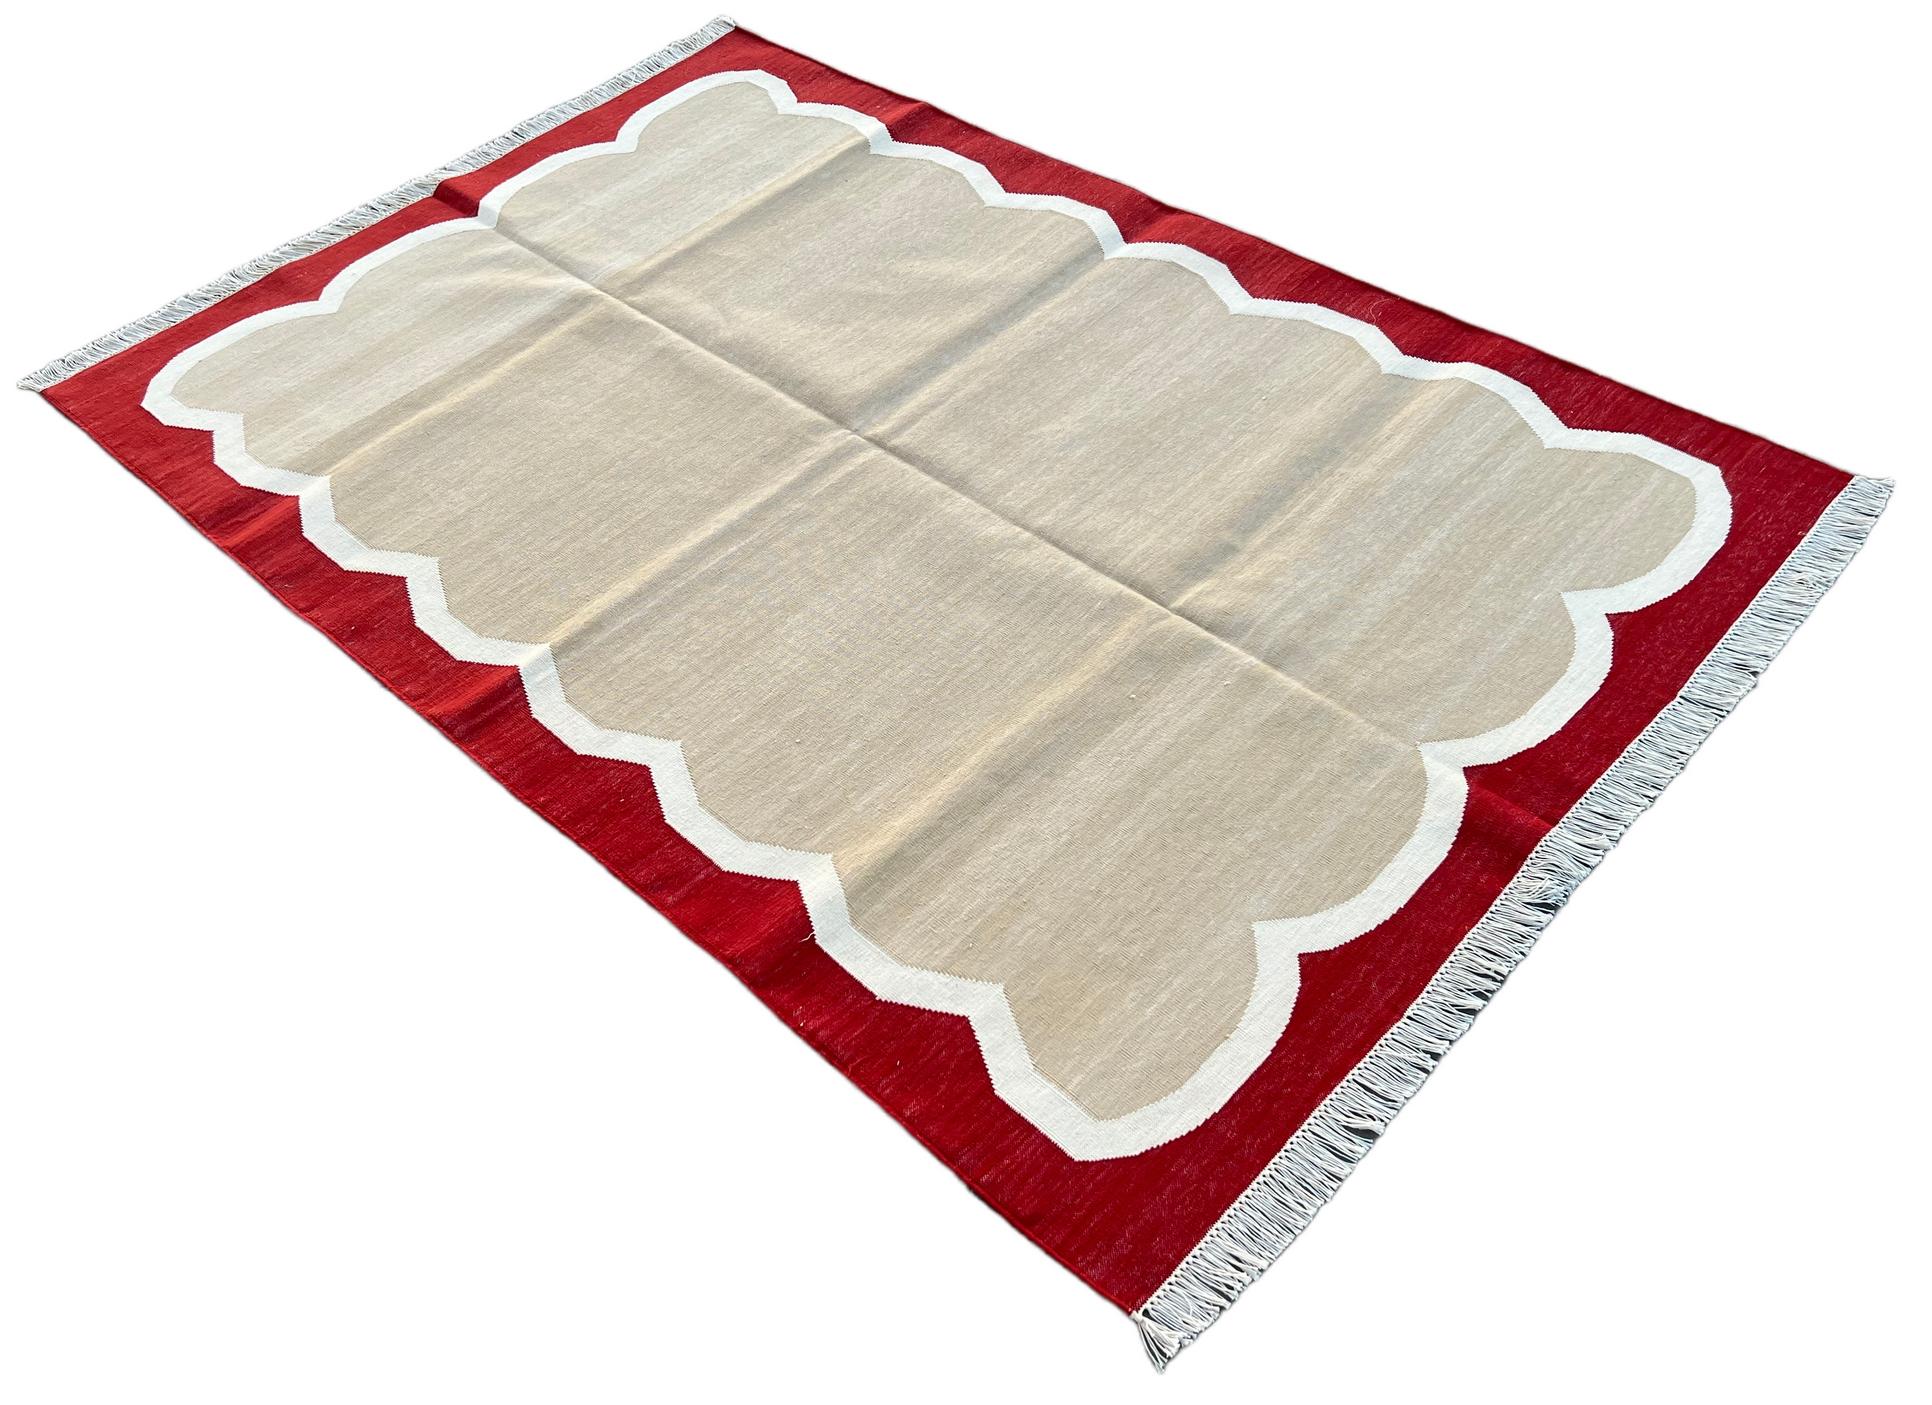 Cotton Vegetable Dyed Beige and Red Scalloped Striped Indian Dhurrie Rug-4'x6' 

These special flat-weave dhurries are hand-woven with 15 ply 100% cotton yarn. Due to the special manufacturing techniques used to create our rugs, the size and color